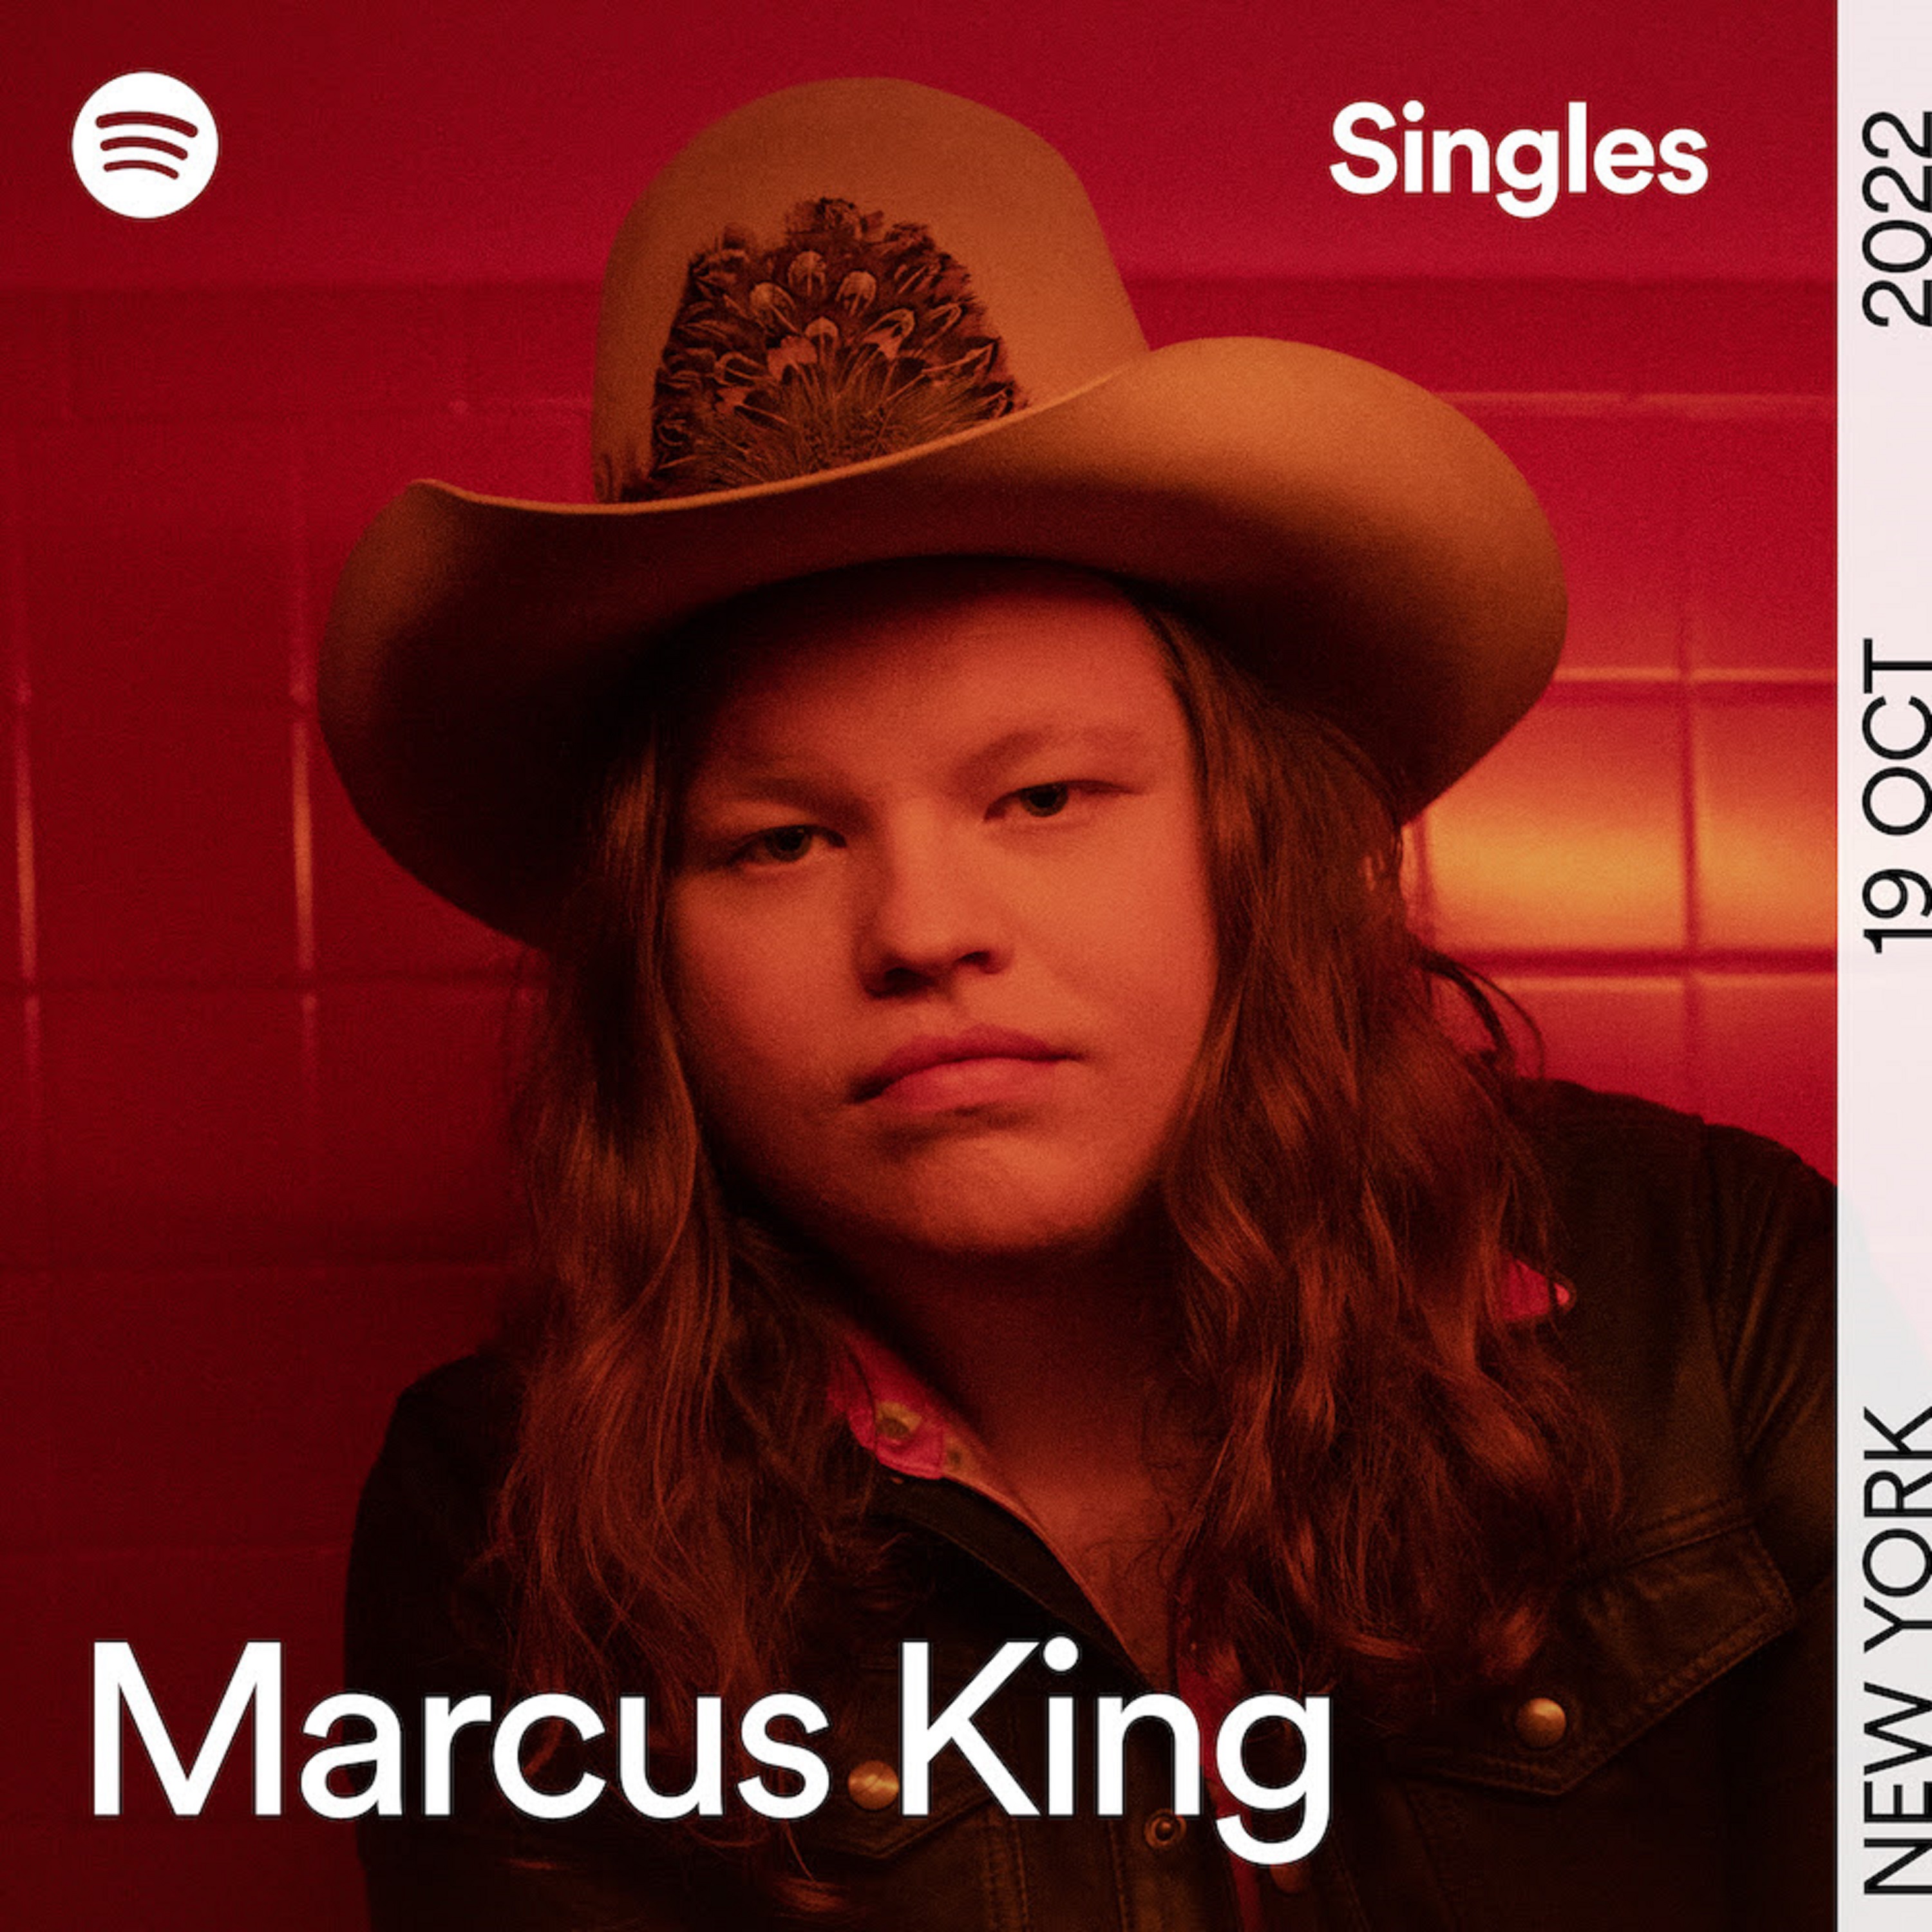 Marcus King releases reimagined versions of “Crazy” and “It’s Too Late” for Spotify Singles